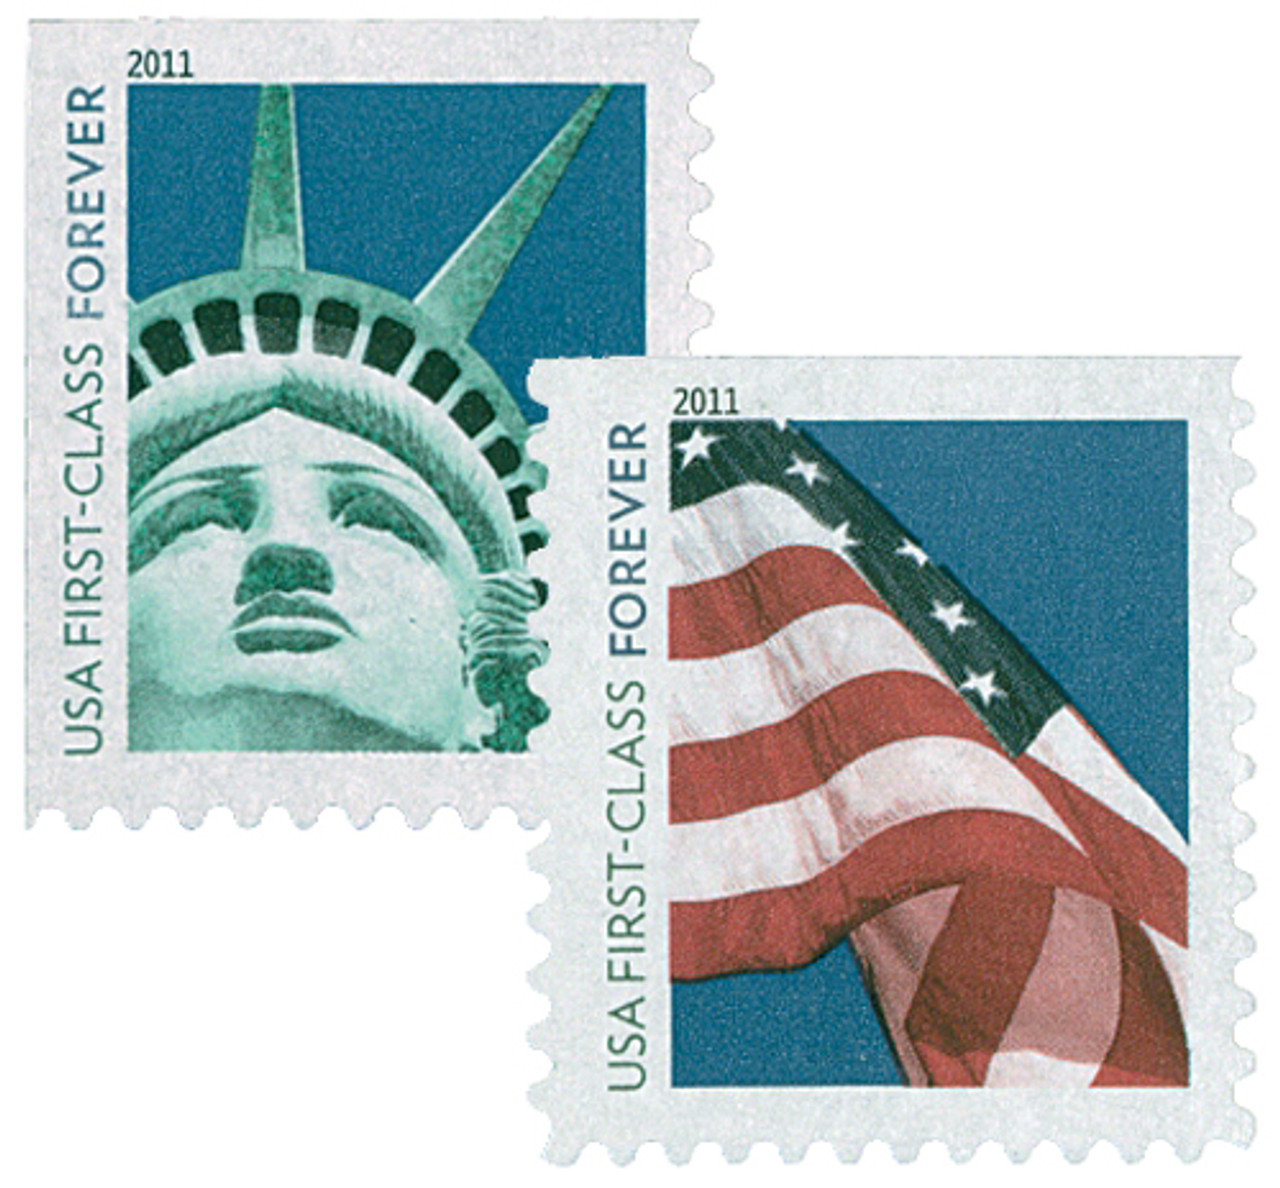 4518-19 - 2011 First-Class Forever Stamp - Lady Liberty and U.S. Flag (ATM,  booklet) - Mystic Stamp Company